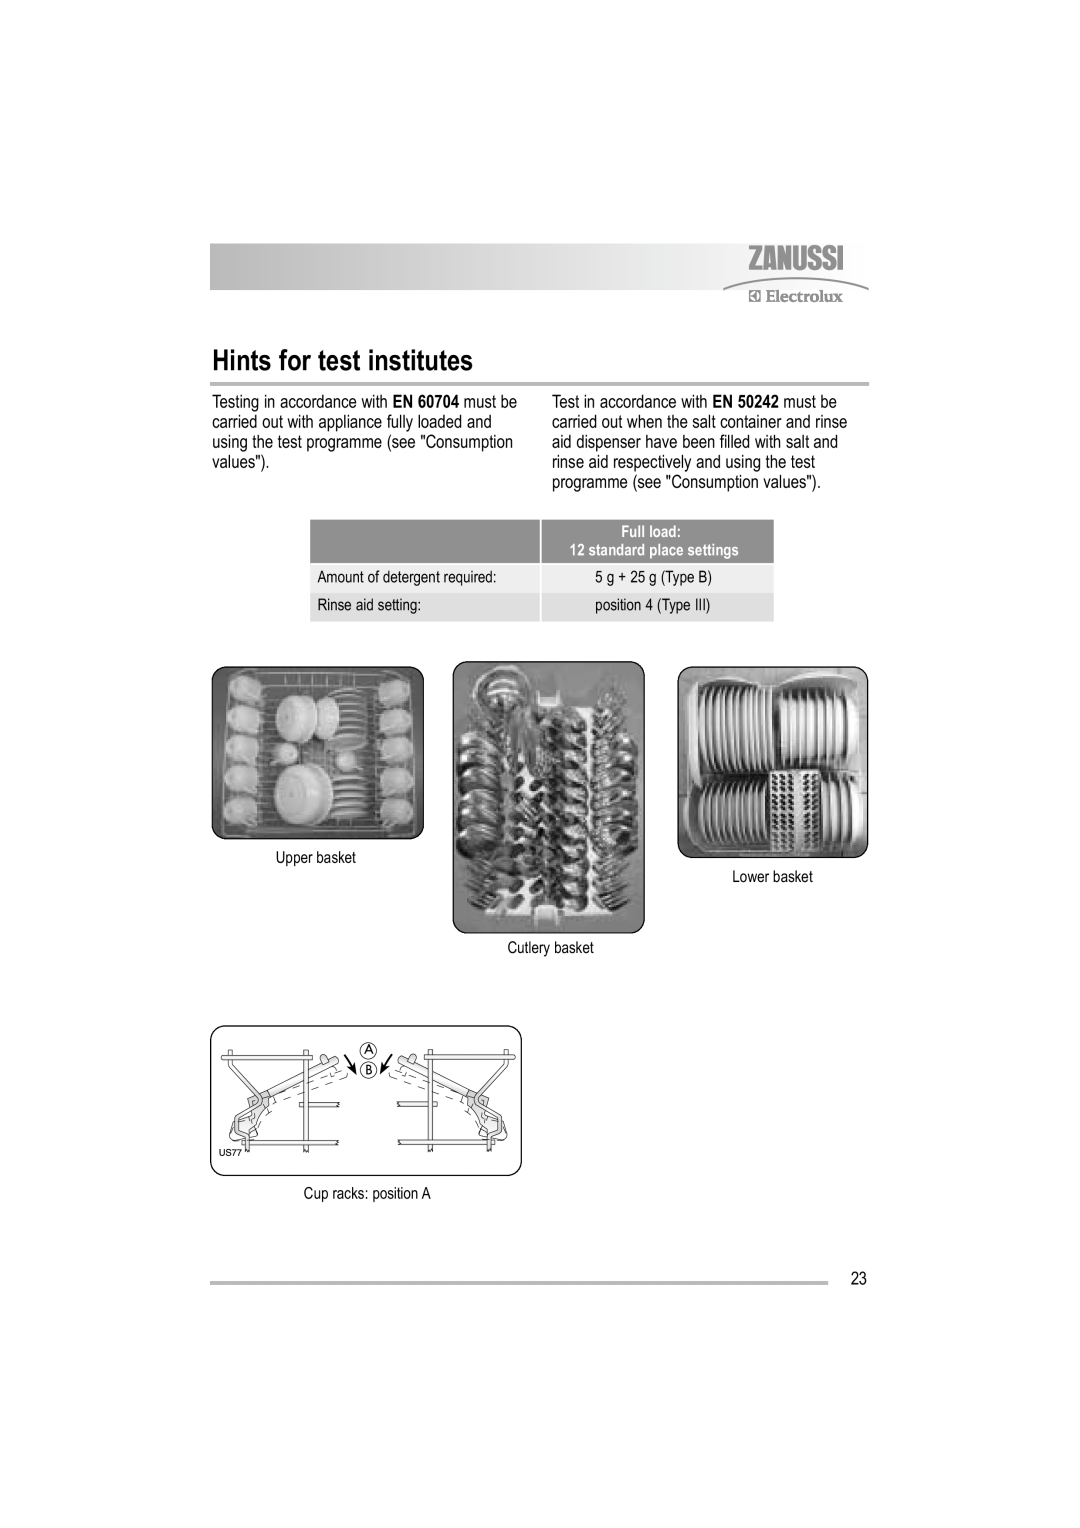 Electrolux ZDF 501 user manual Hints for test institutes, Full load, standard place settings 